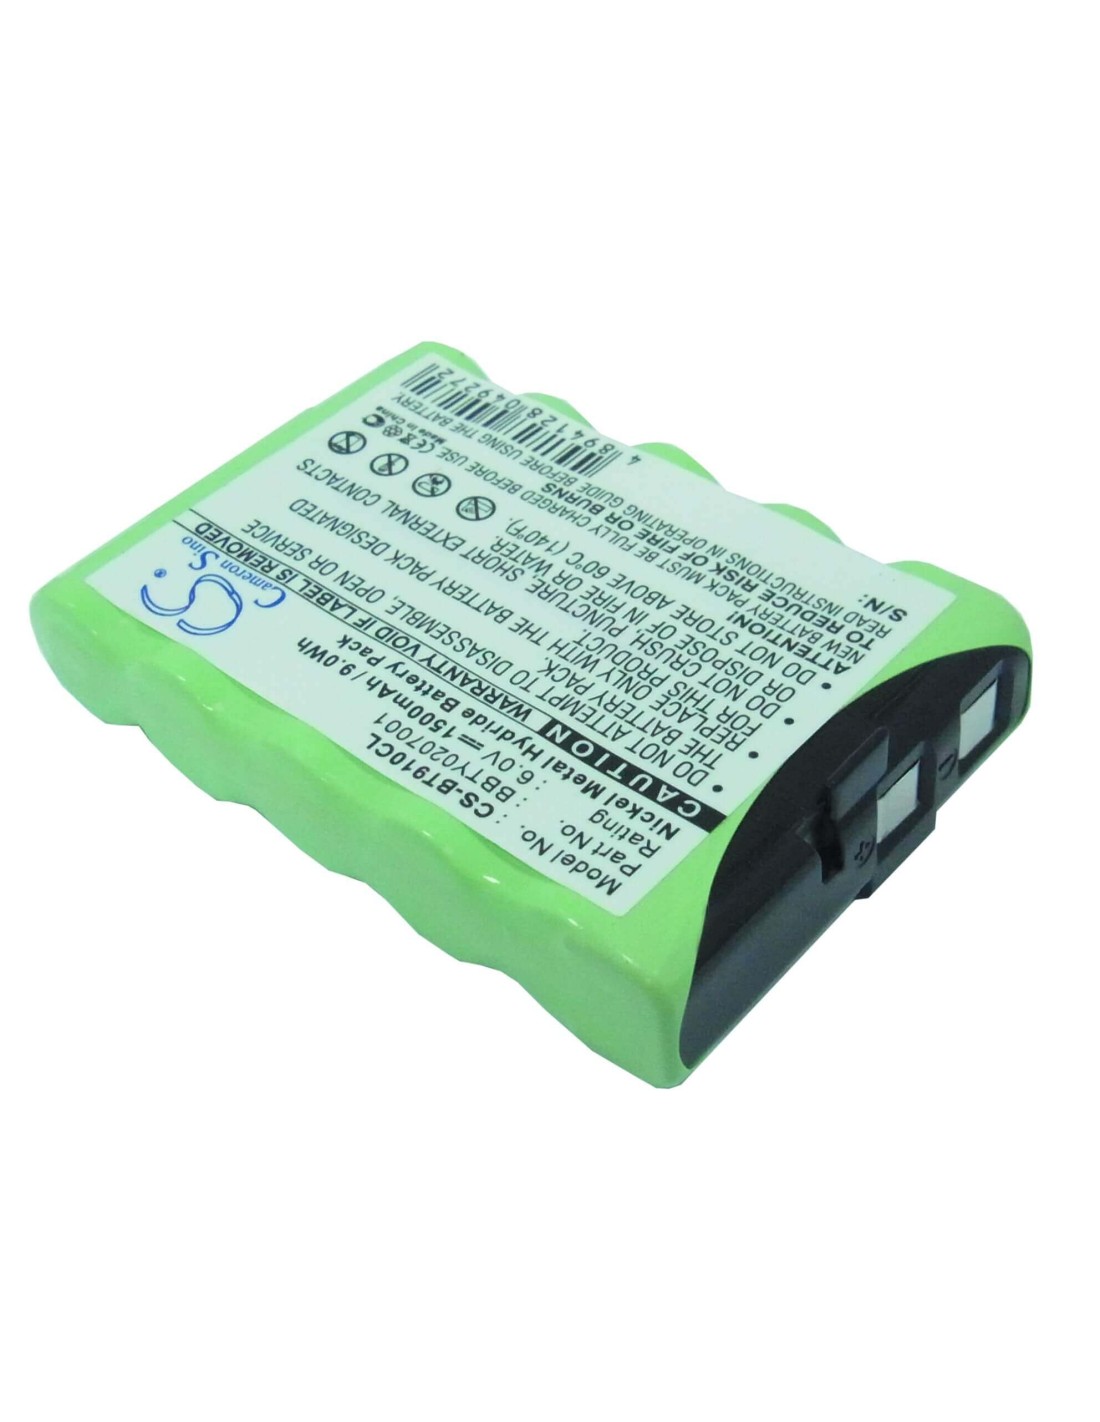 Battery for At&t, 24896, 84020, Stb-910 6V, 1500mAh - 9.00Wh